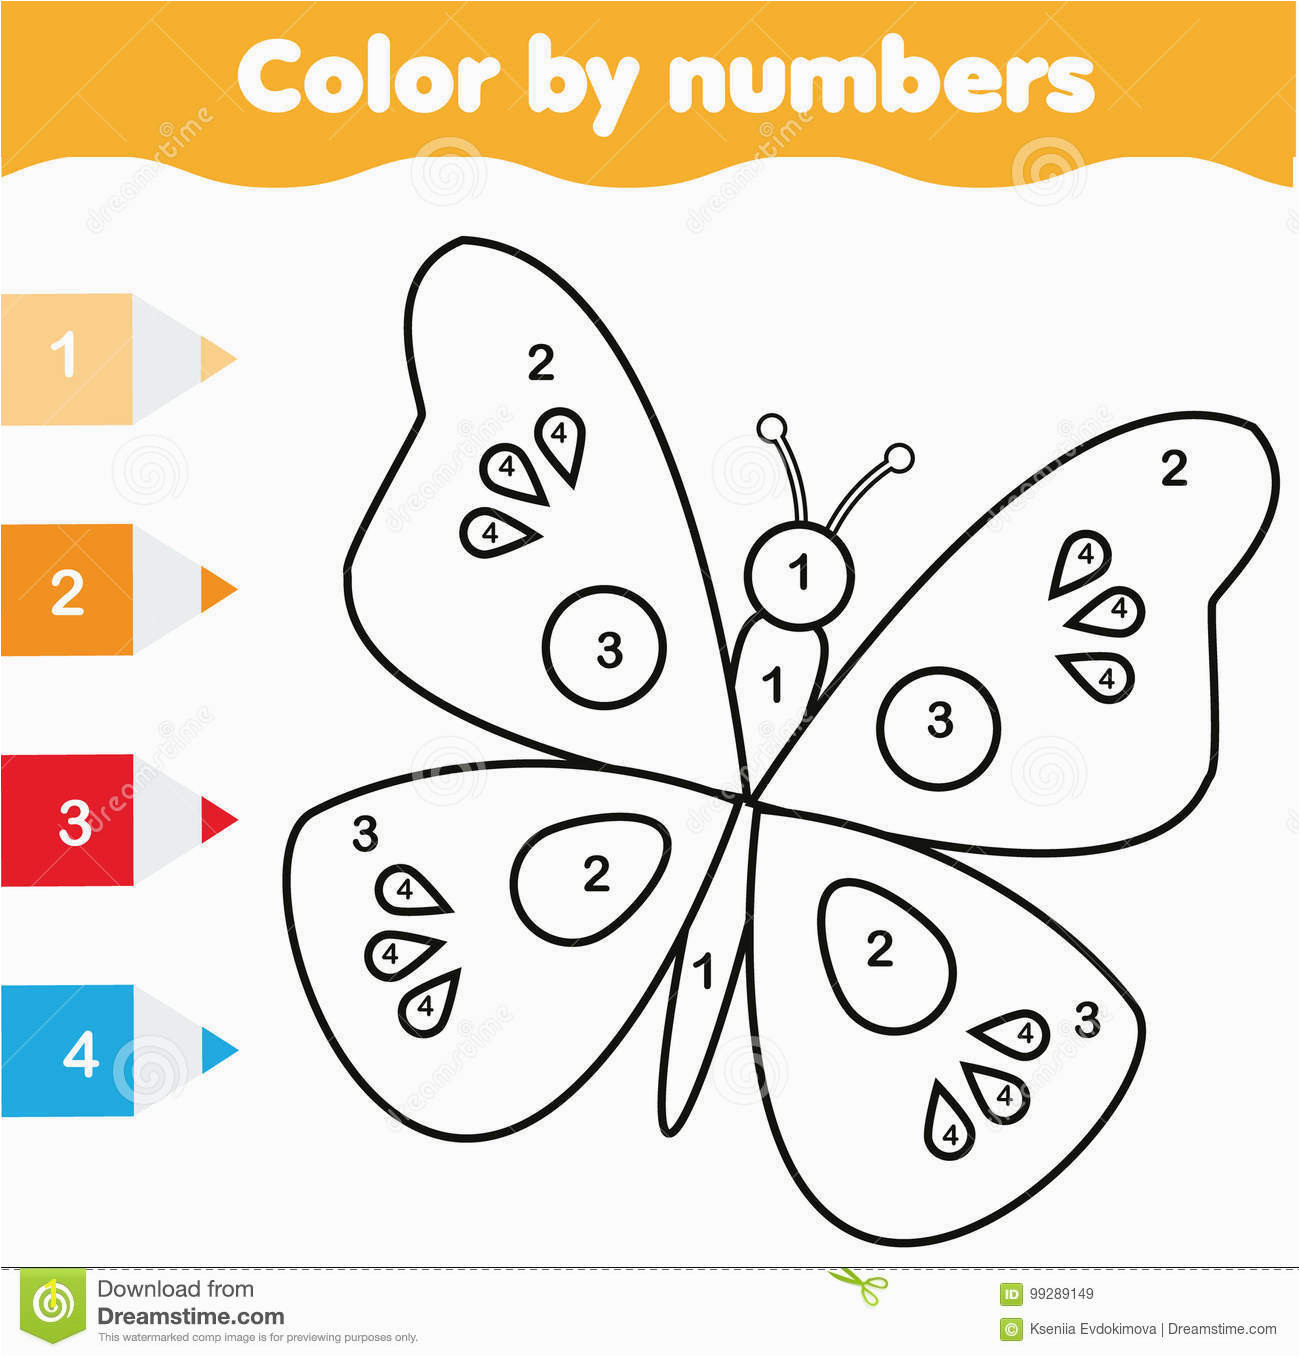 Coloring page with butterfly Color by numbers educational children game drawing kids activity